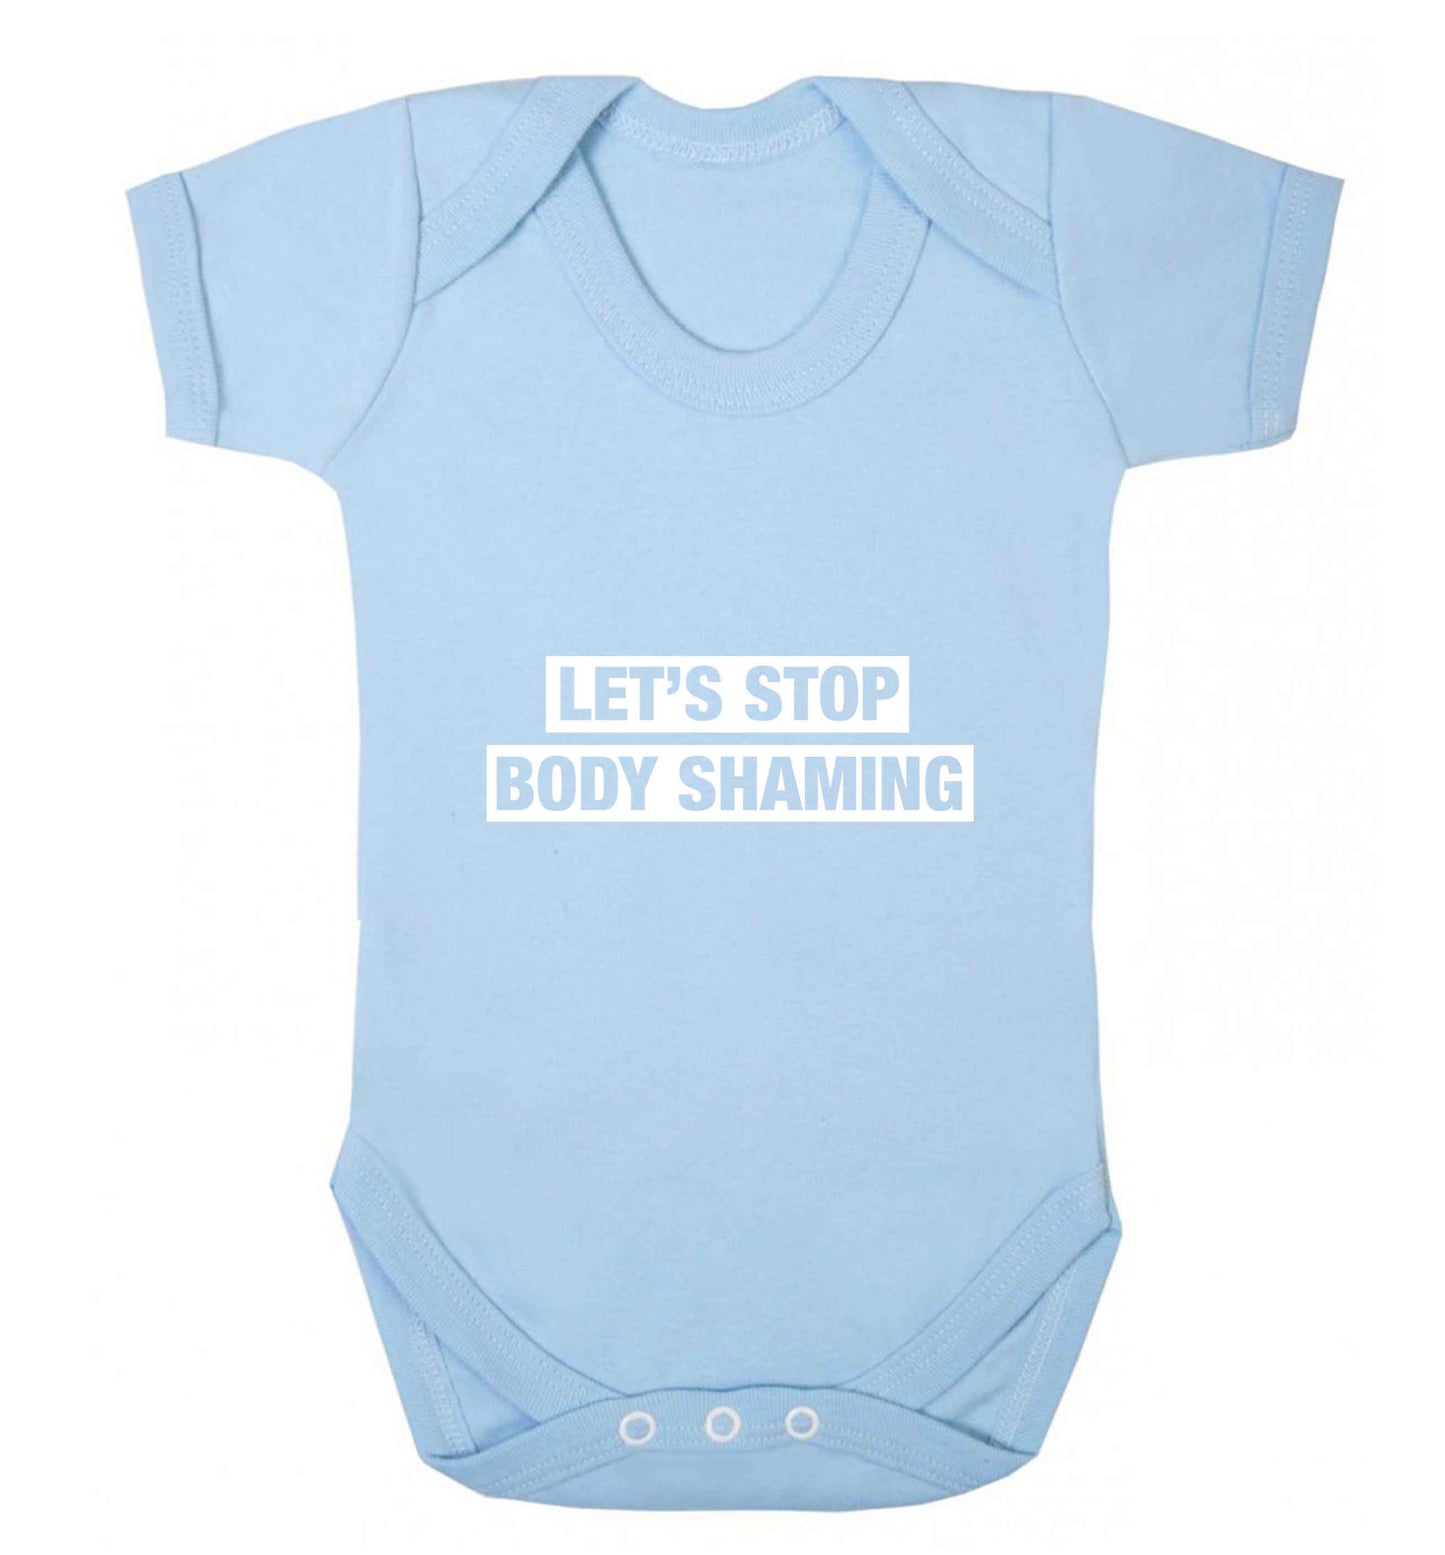 Let's stop body shaming baby vest pale blue 18-24 months